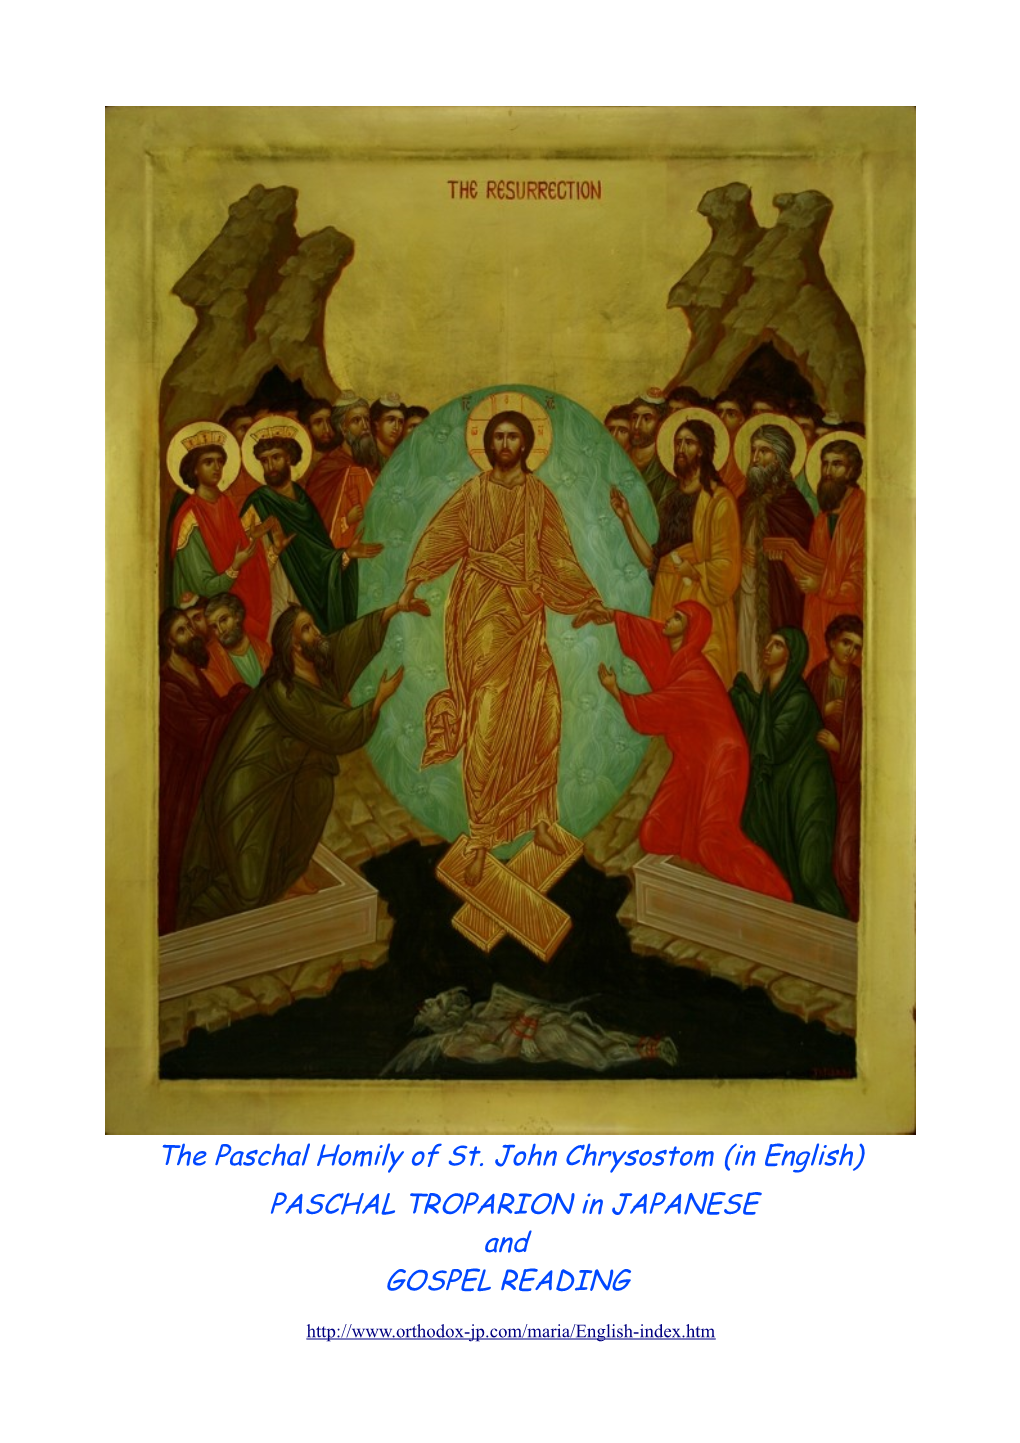 PASCHAL TROPARION in JAPANESE and GOSPEL READING